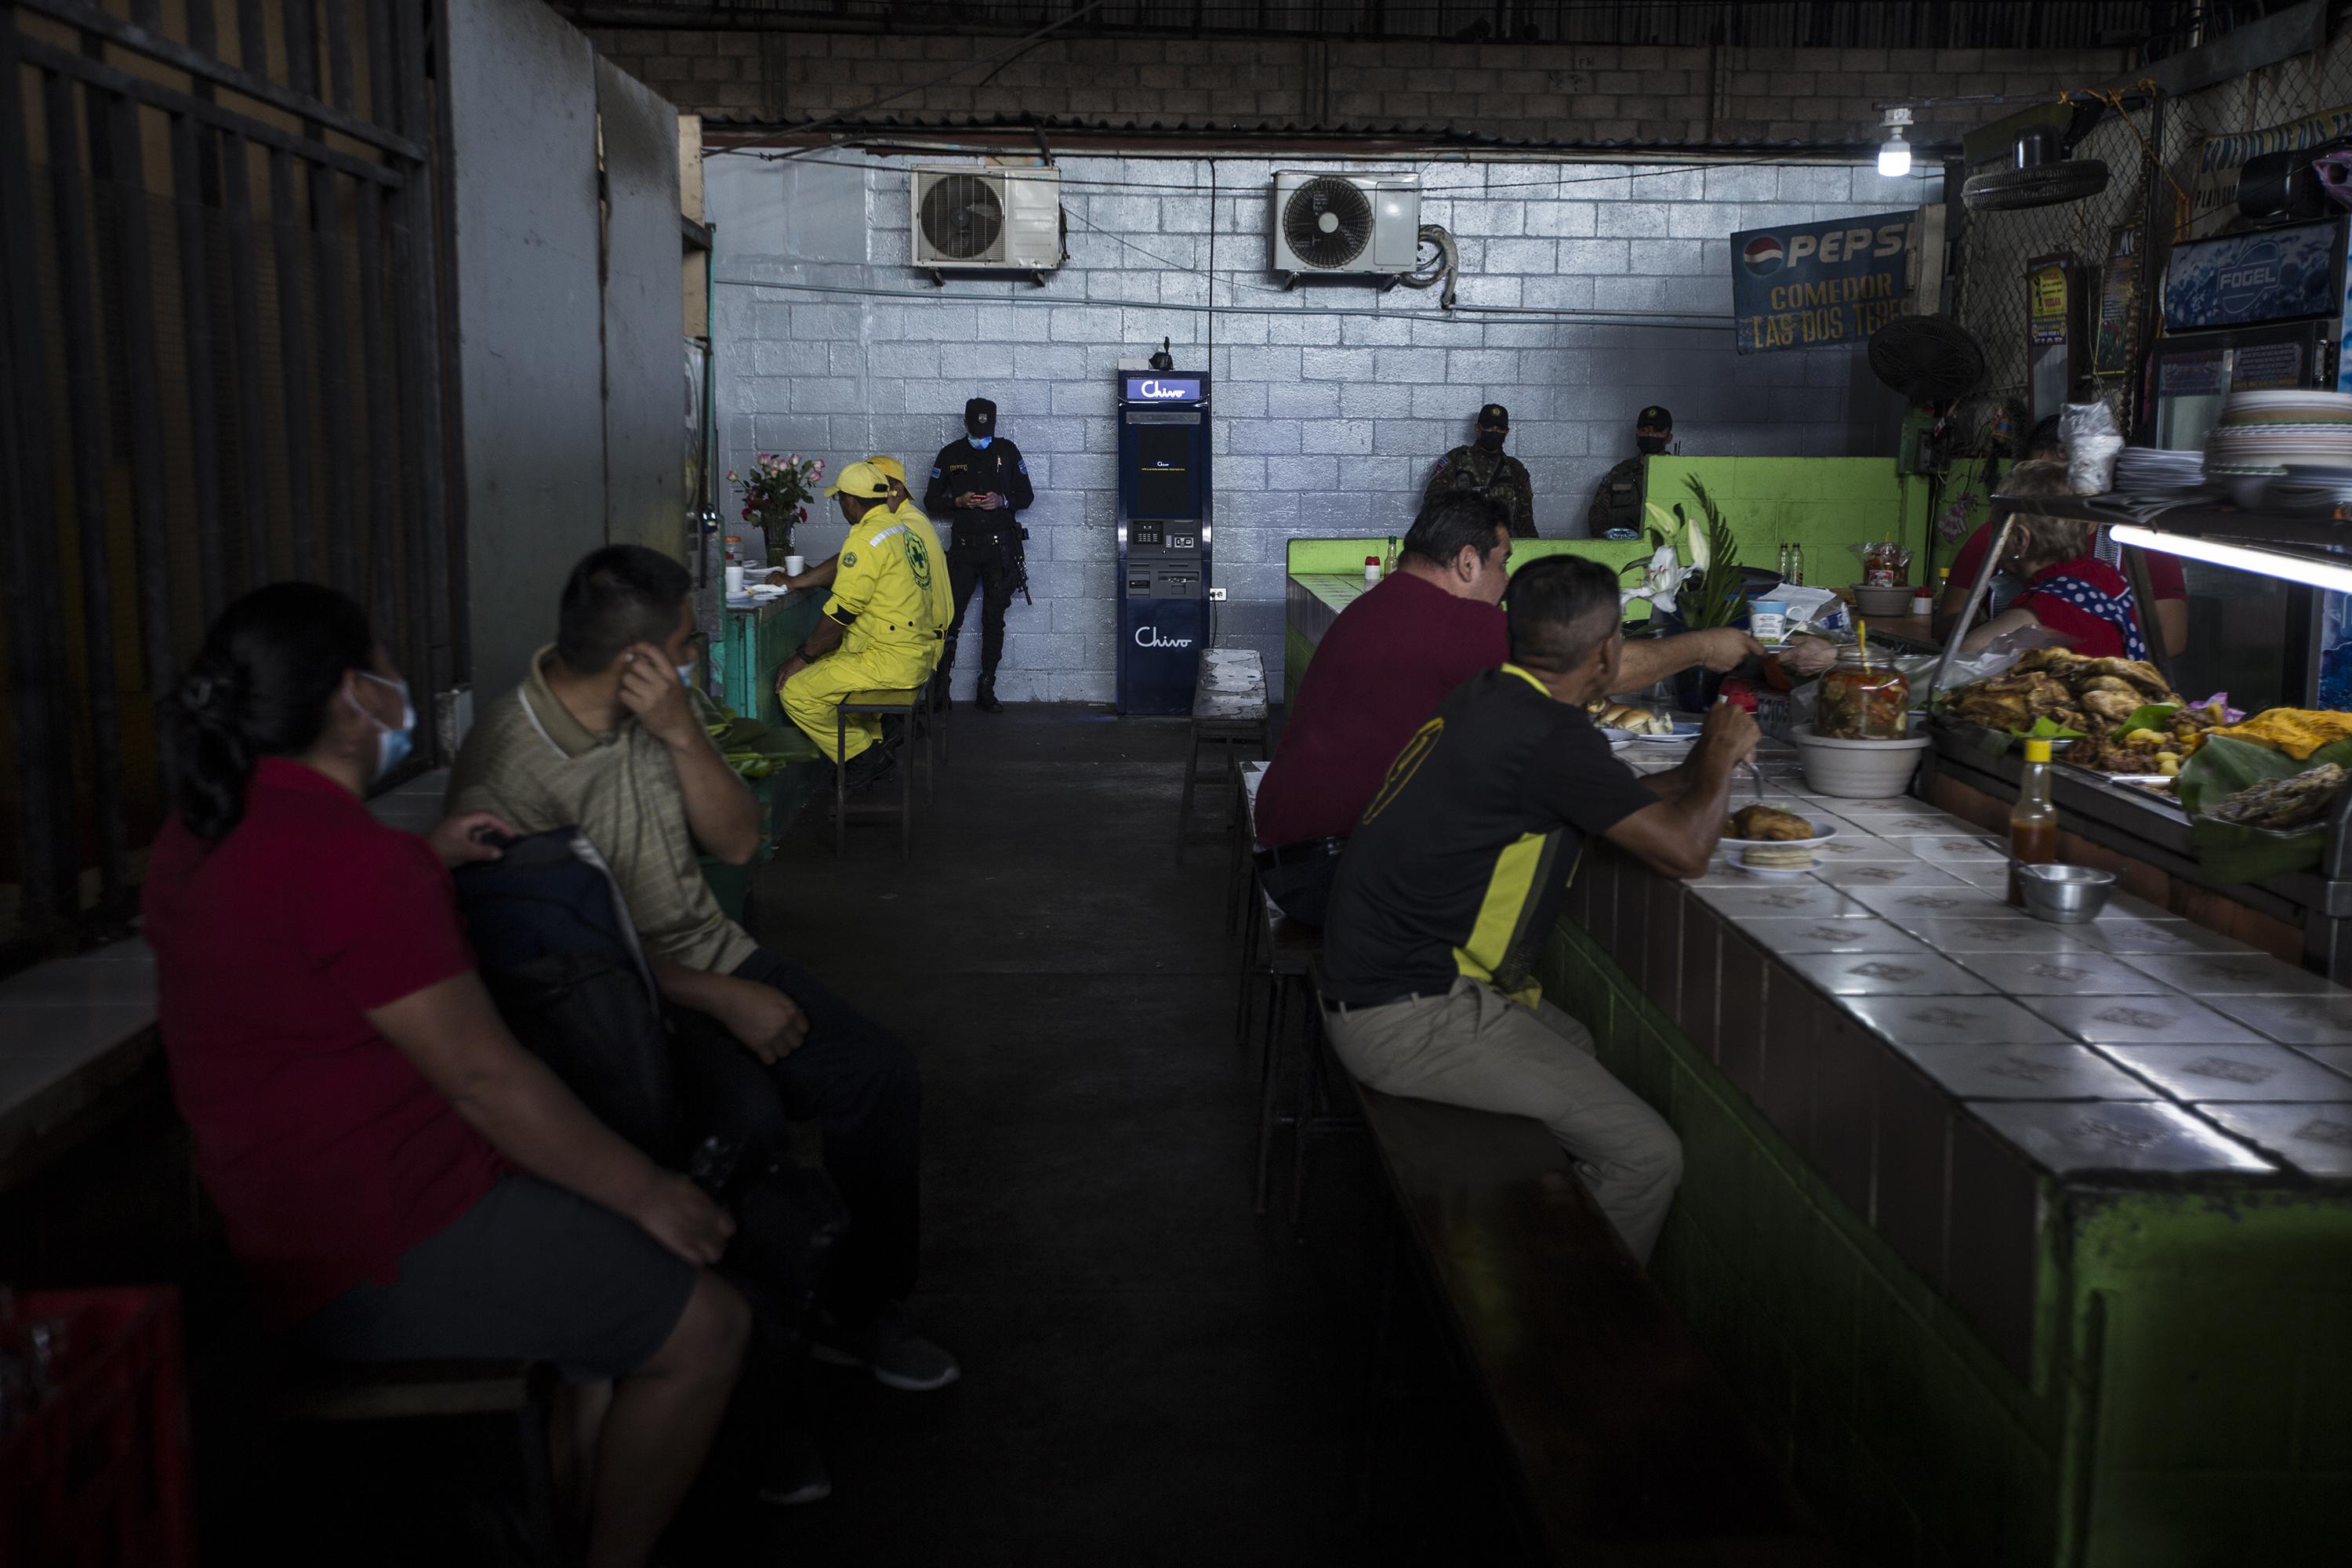 Two soldiers and a police officer watch over the Chivo ATM in the lunchroom in the Central Market of Santa Tecla. Photo: Víctor Peña/El Faro